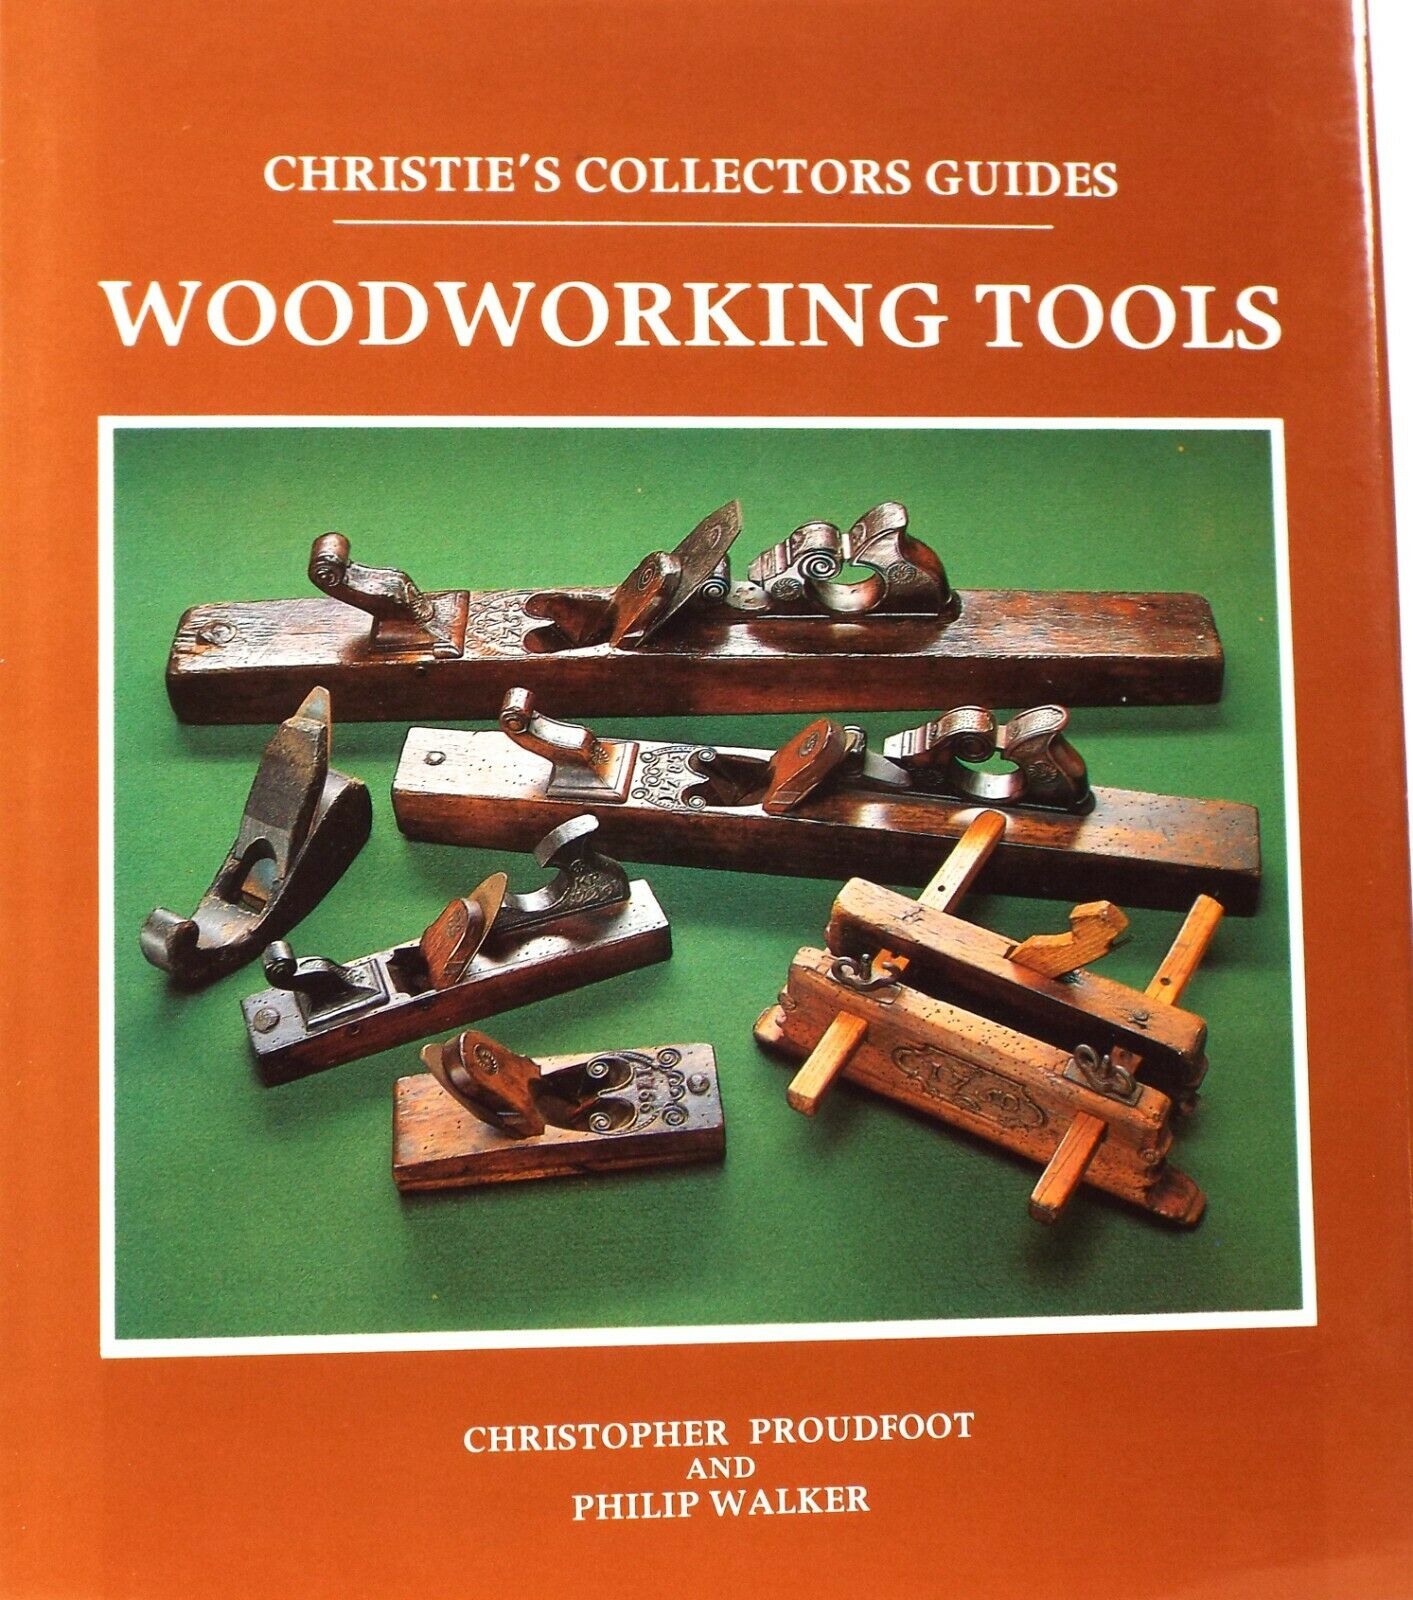 Christie’s Collectors Guide, Antique Woodworking Tools, Proudfoot & Walker, 1984